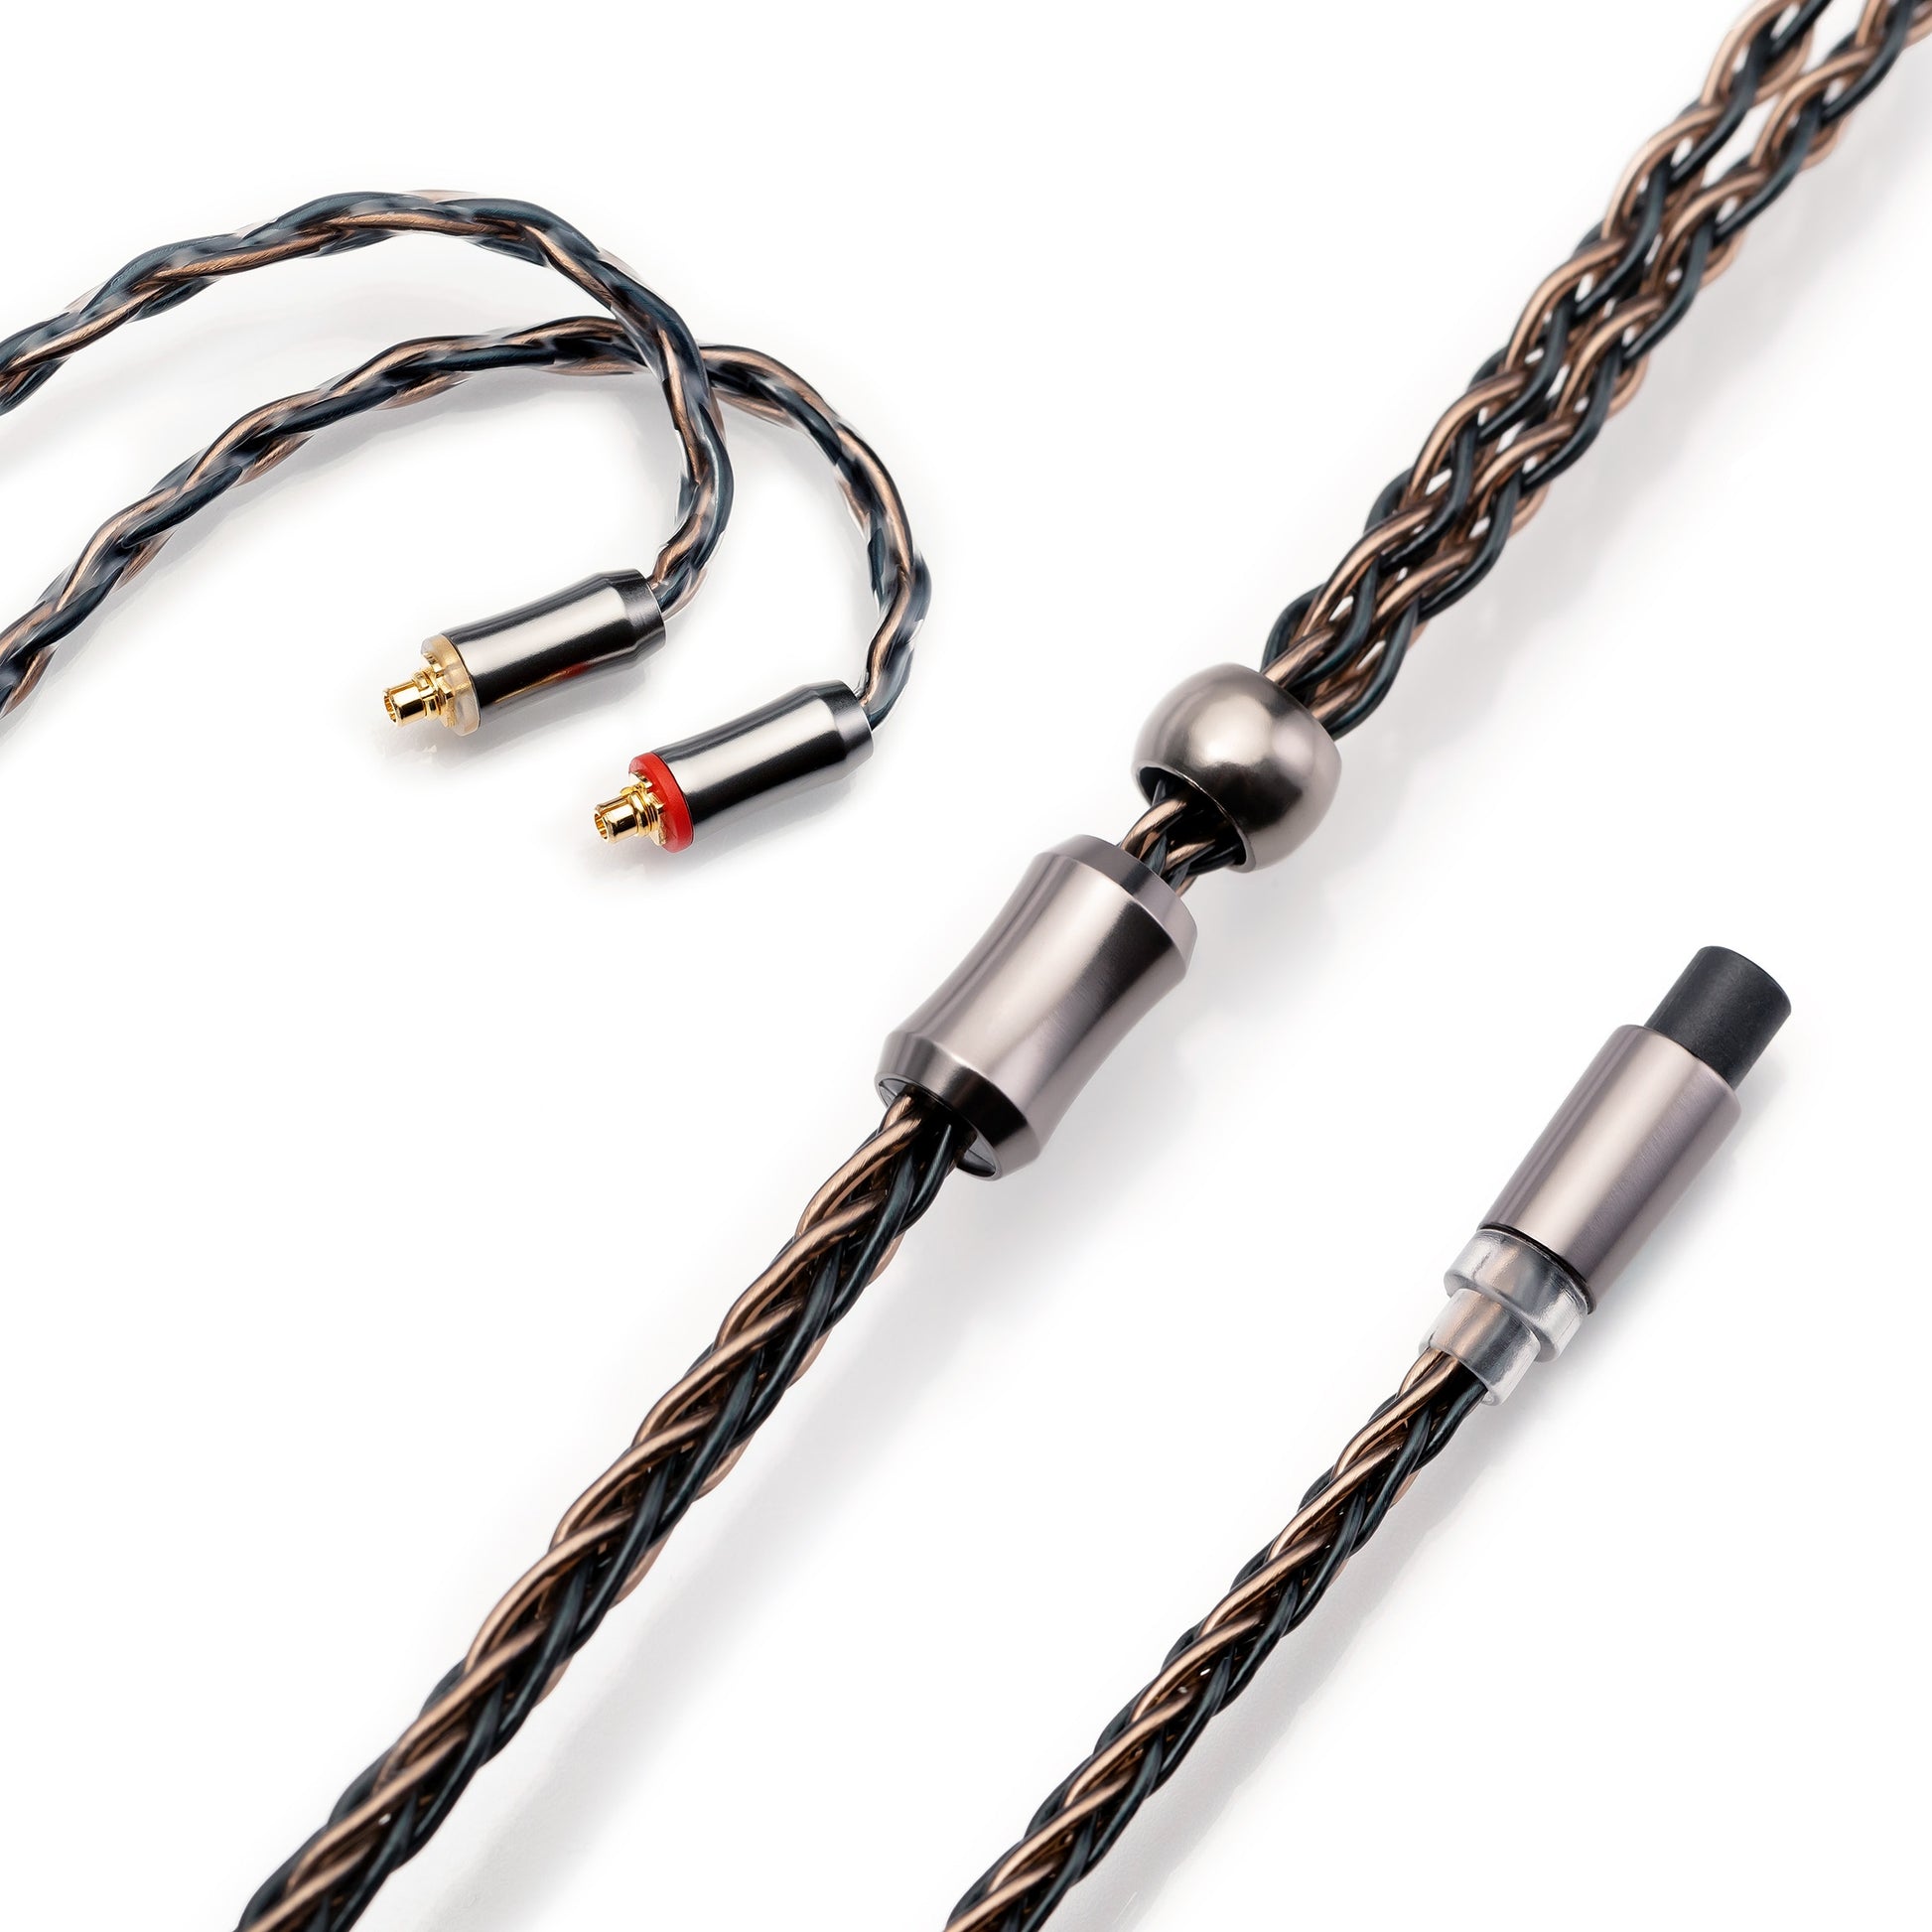 Kinera Leyding Modular Upgrade Cable (2.5+3.5+4.4),OFC+Alloy copper with 5N silver plated, 8 core,0.78 2pin / MMCX connector - The HiFi Cat